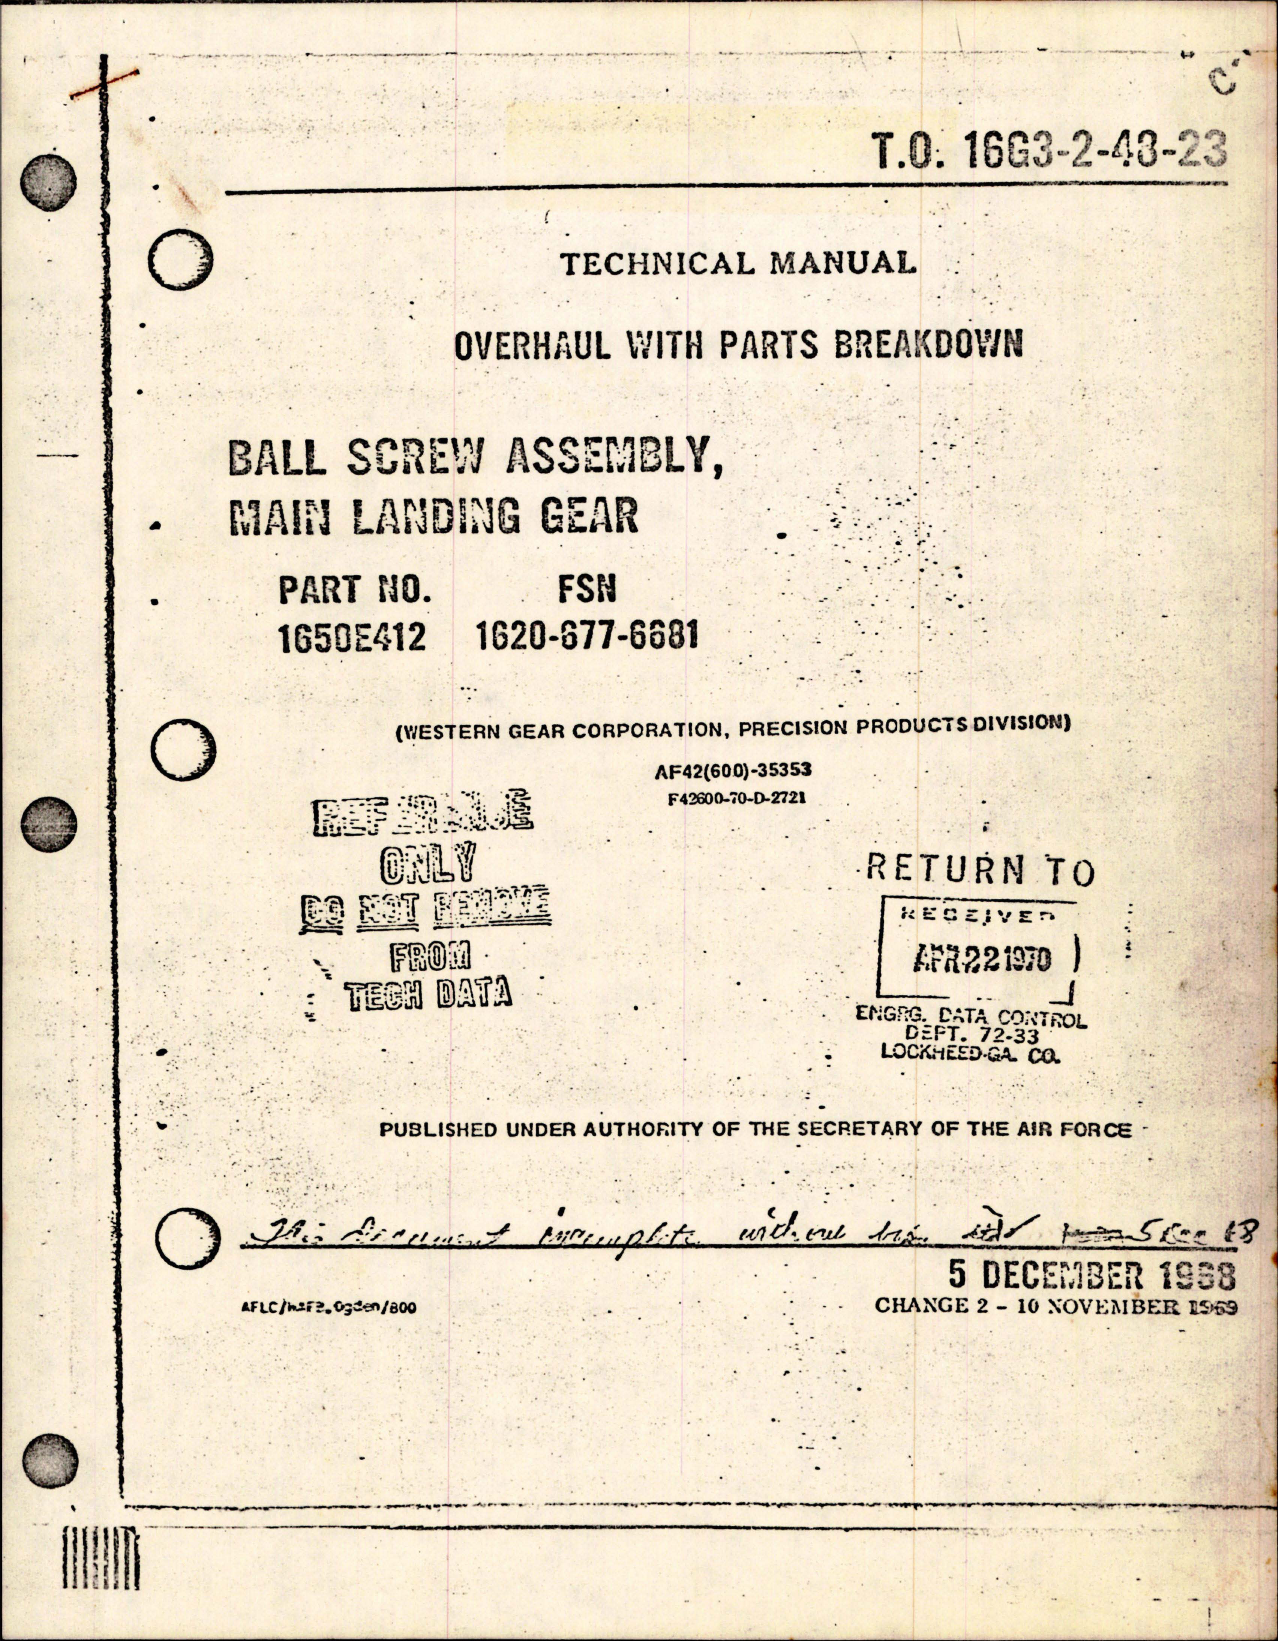 Sample page 1 from AirCorps Library document: Overhaul with Parts Breakdown for Main Landing Gear Ball Screw Assembly - Part 1650E412 - Change No. 2 